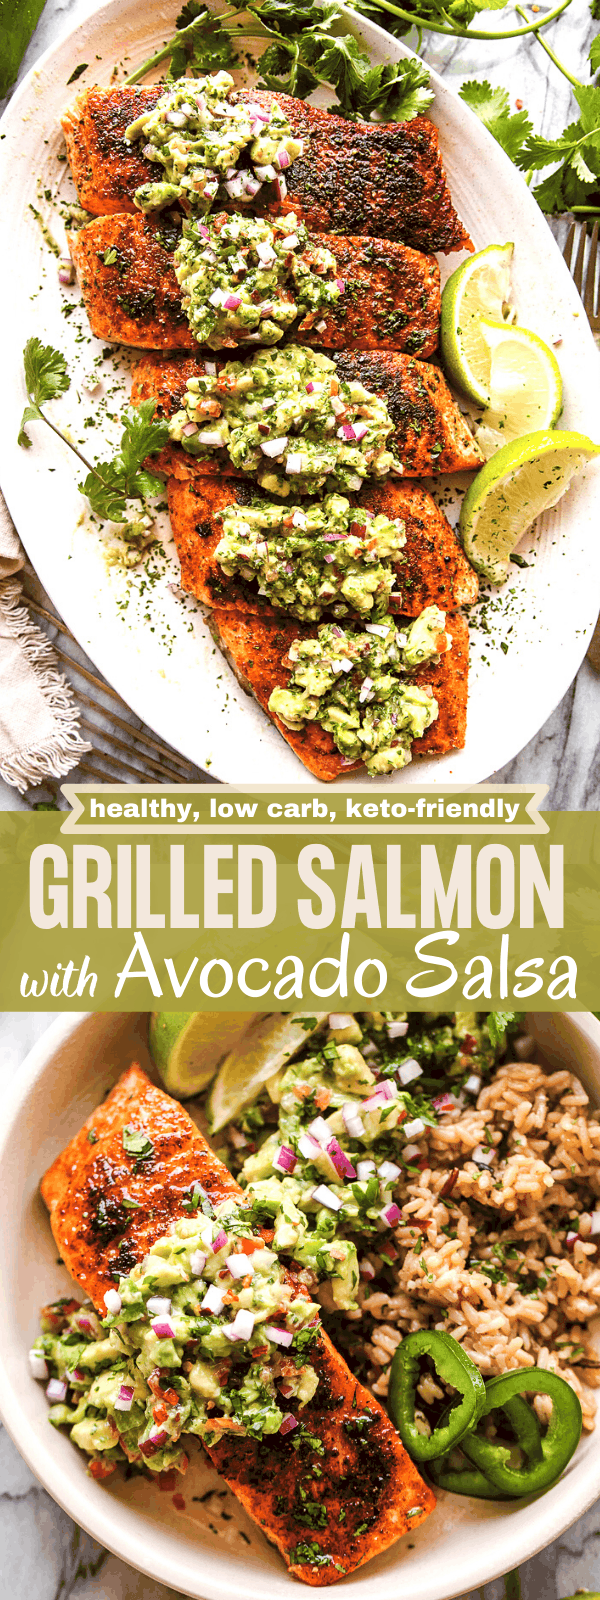 Grilled Salmon with Avocado Salsa | Diethood